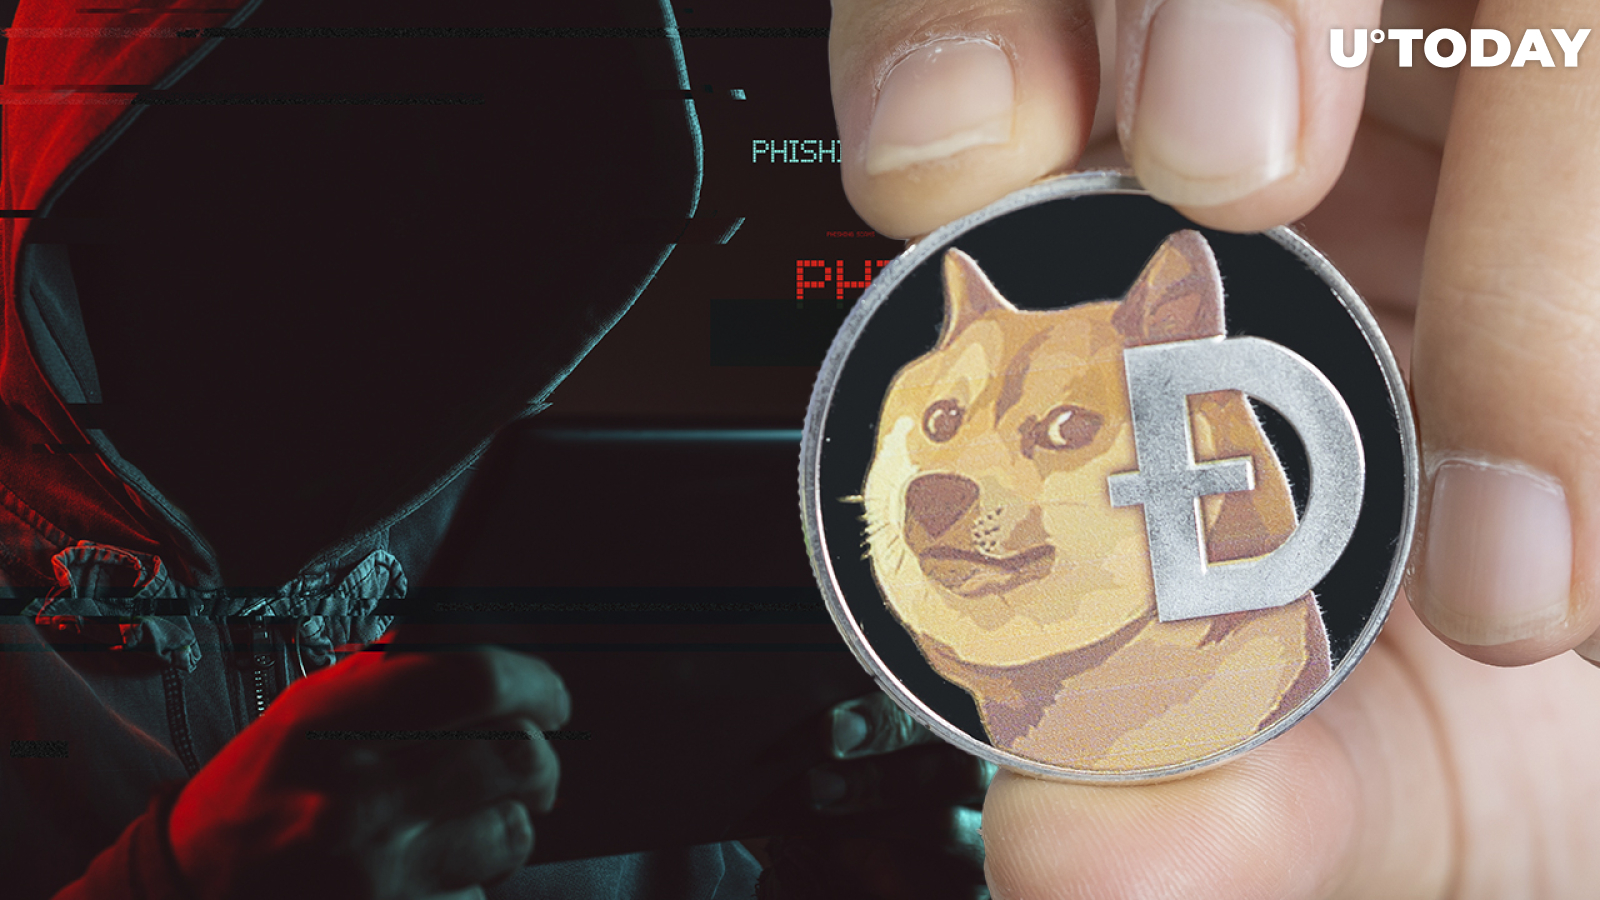 Dogecoin Copycat Ends Up Being "Rug Pull"